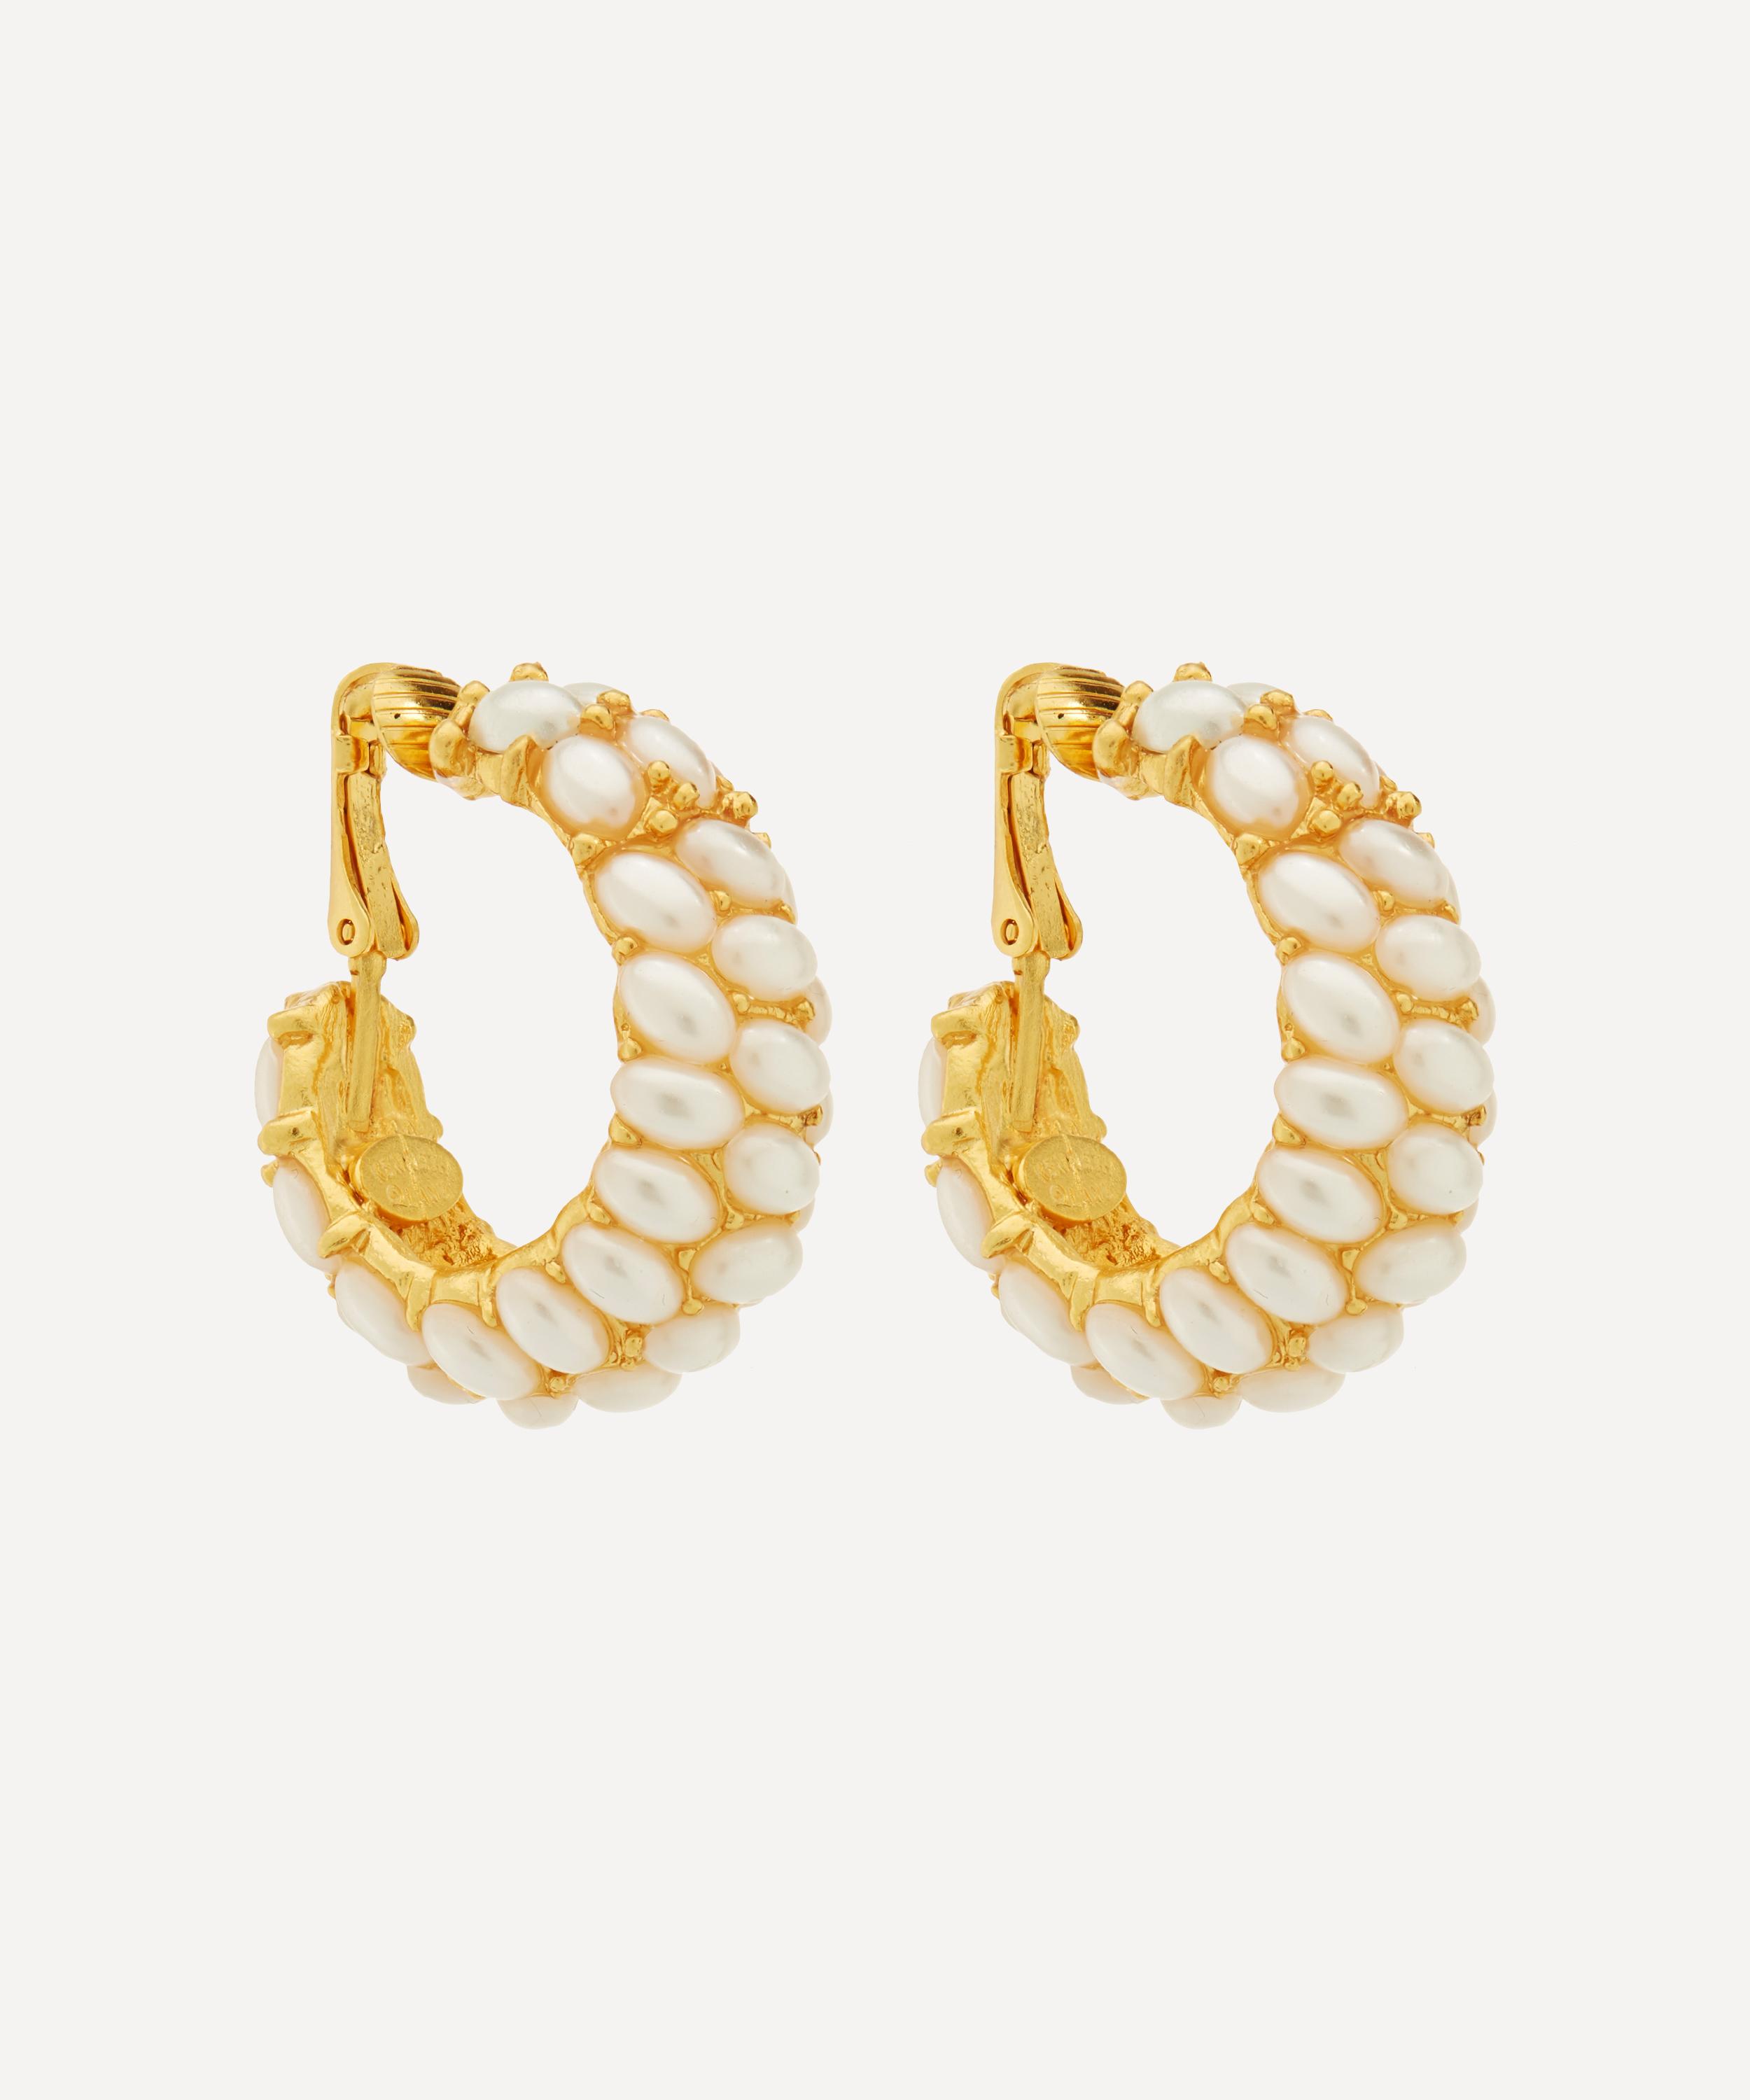 Kenneth Jay Lane Gold-Plated Cabochon Clip-On Earrings 